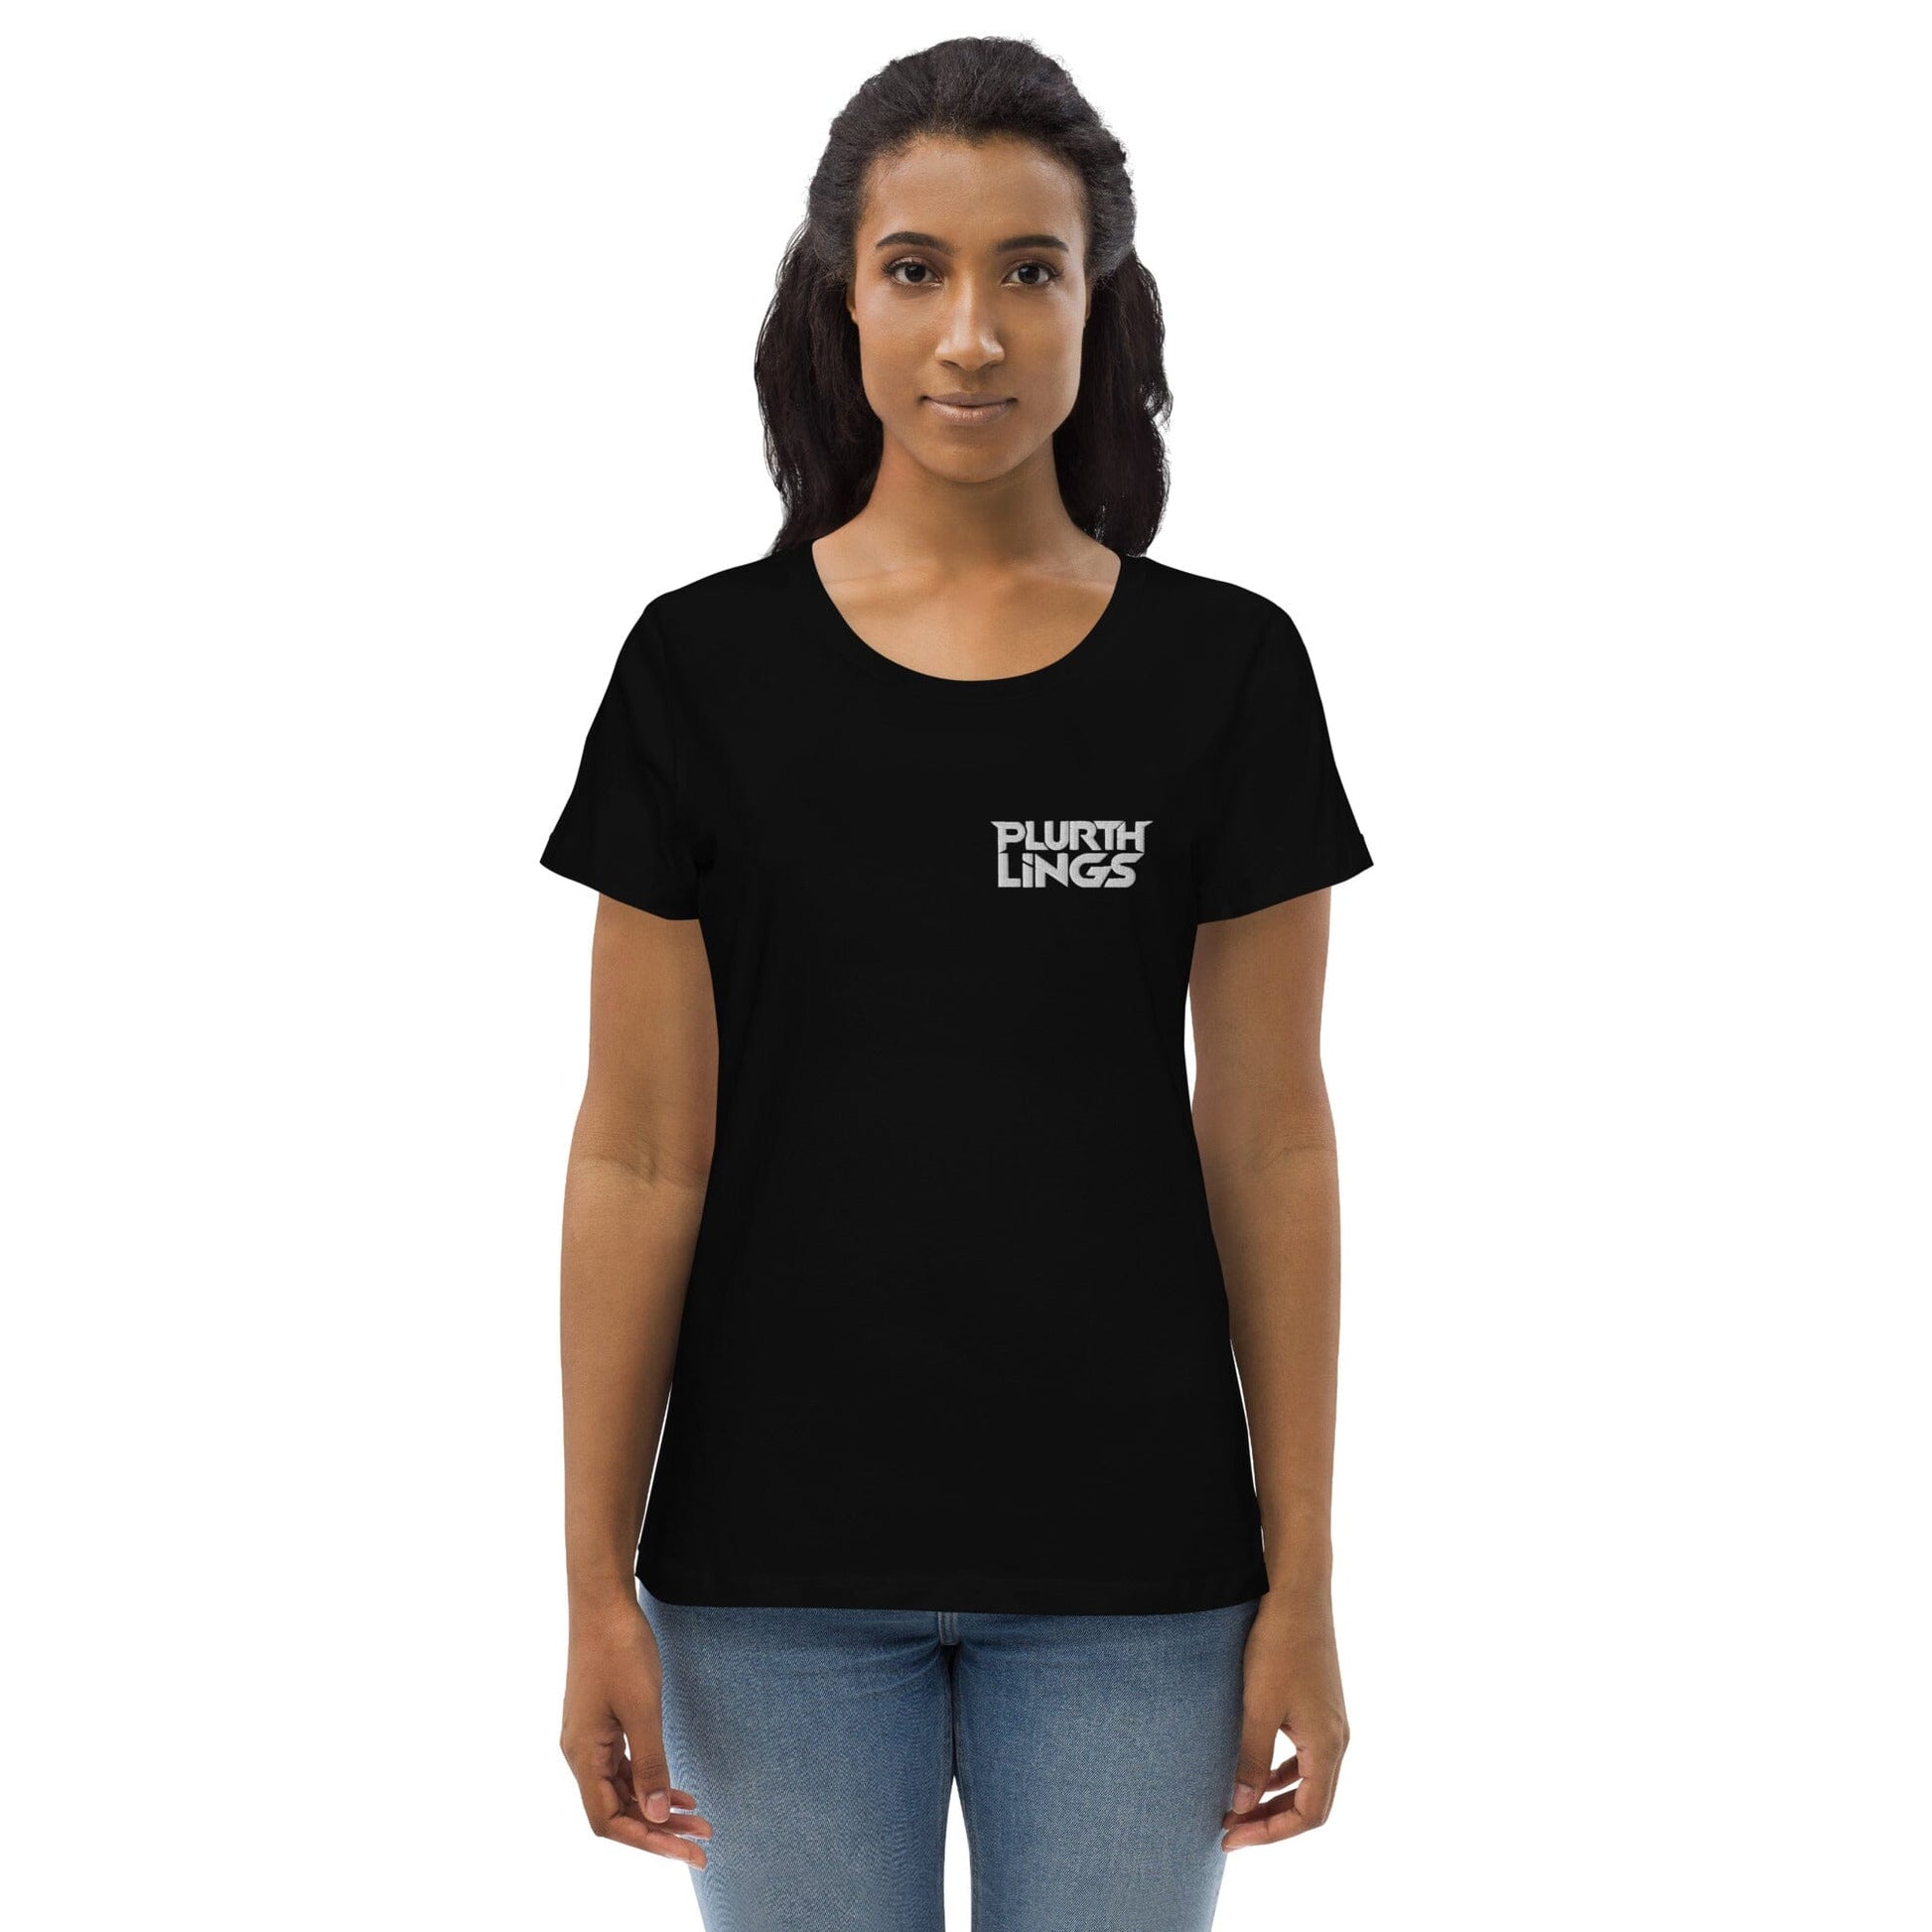 Plurthlings Embroidered Women's Fitted Eco Tee PLURTHLINGS Black S 